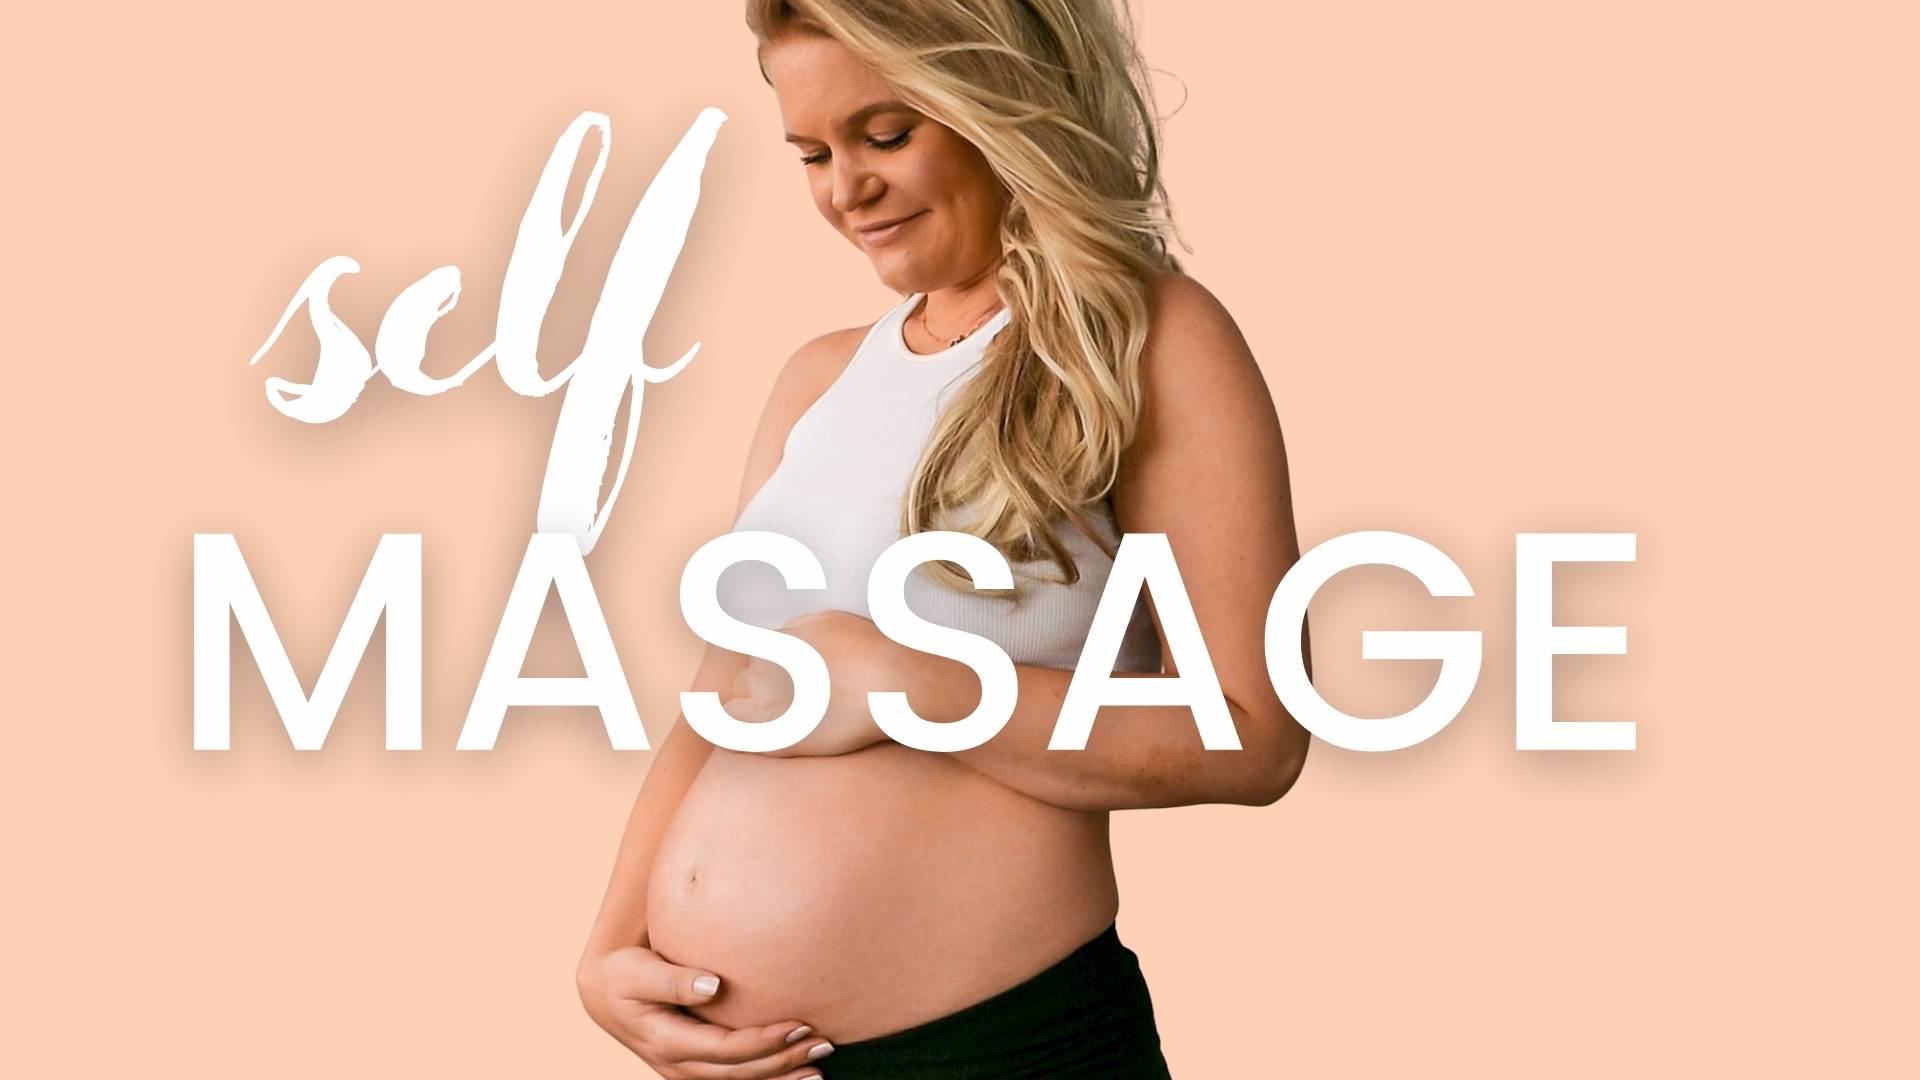 PRENATAL MASSAGE - How to give yourself a pregnancy massage - Belly edition